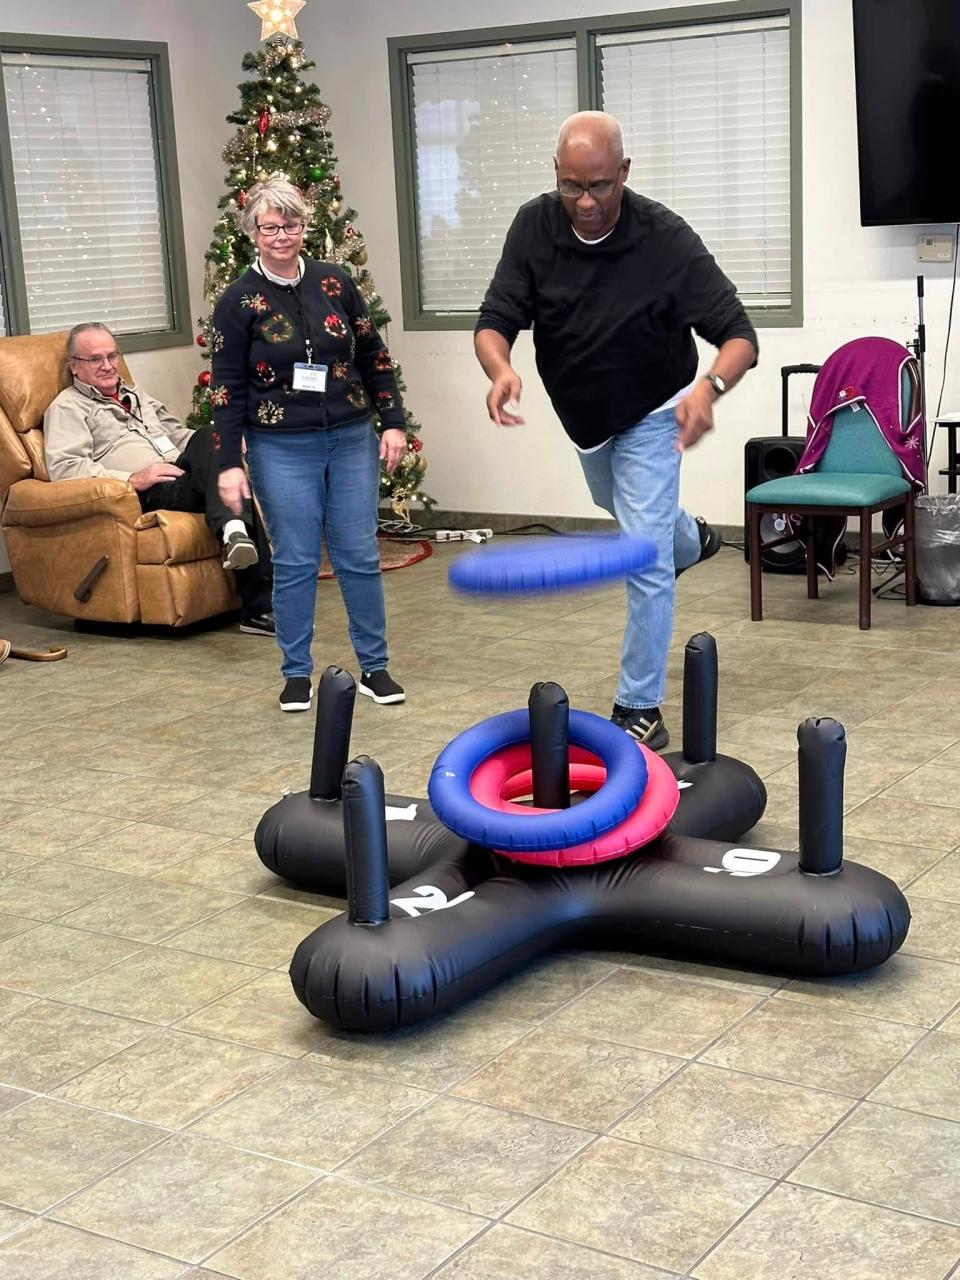 A friendly game of ring toss is among the fun activities at Coleman Adult Day Services in Ravenna.